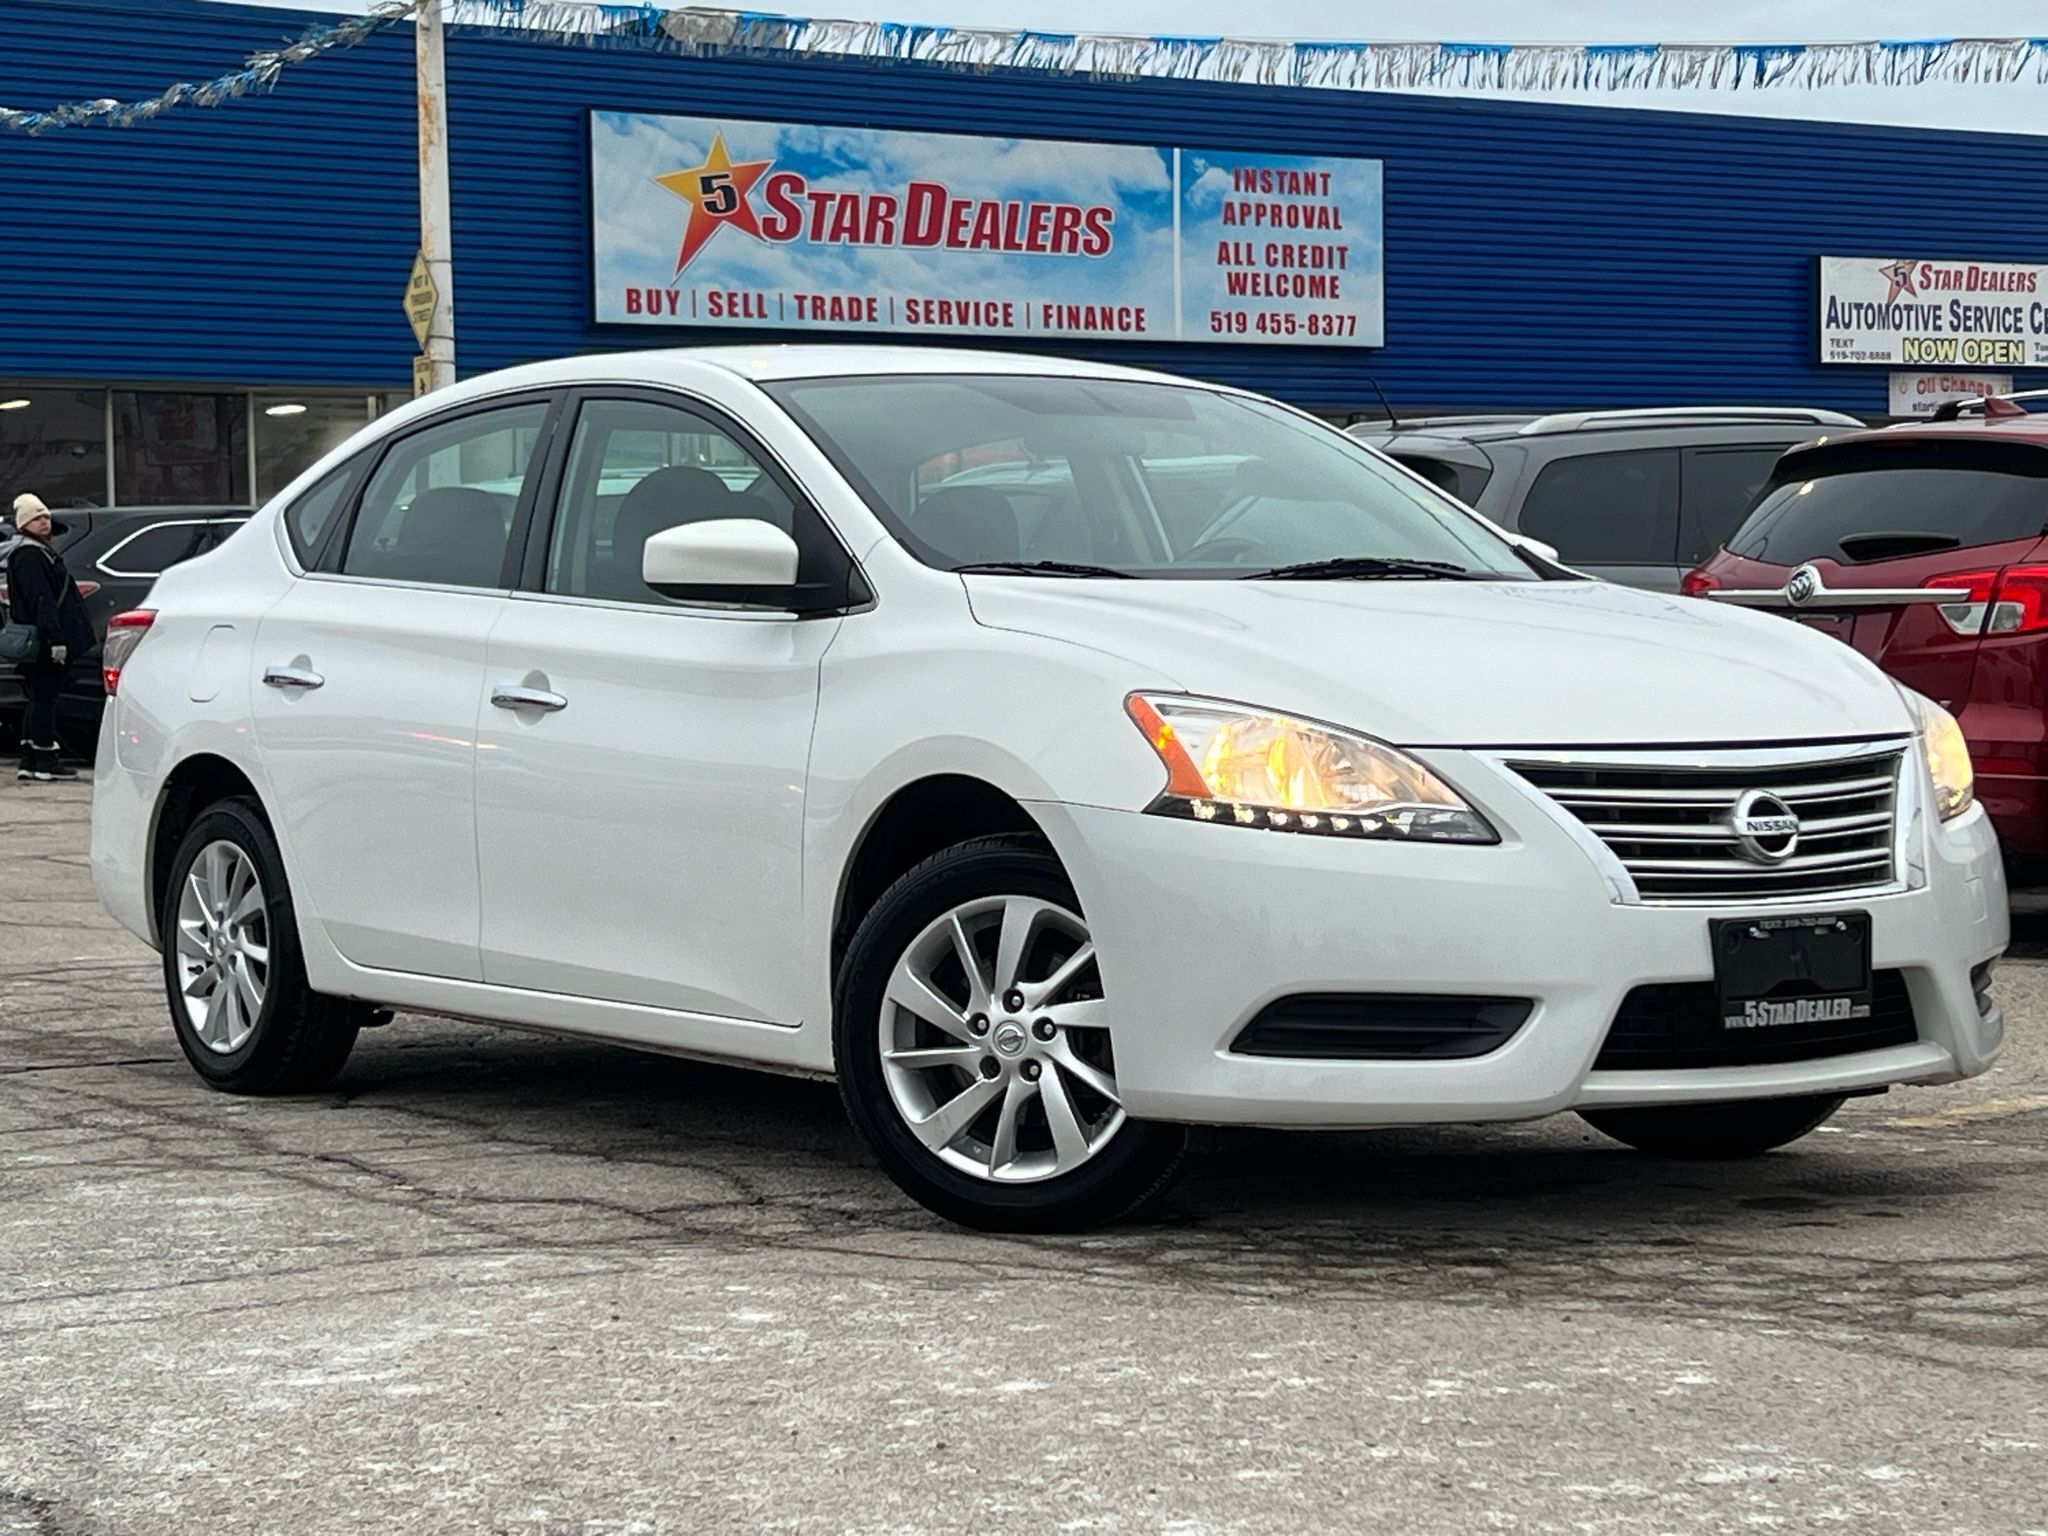 2015 Nissan Sentra H-SEATS R-CAM MINT CONDITION WE FINANCE ALL CREDIT